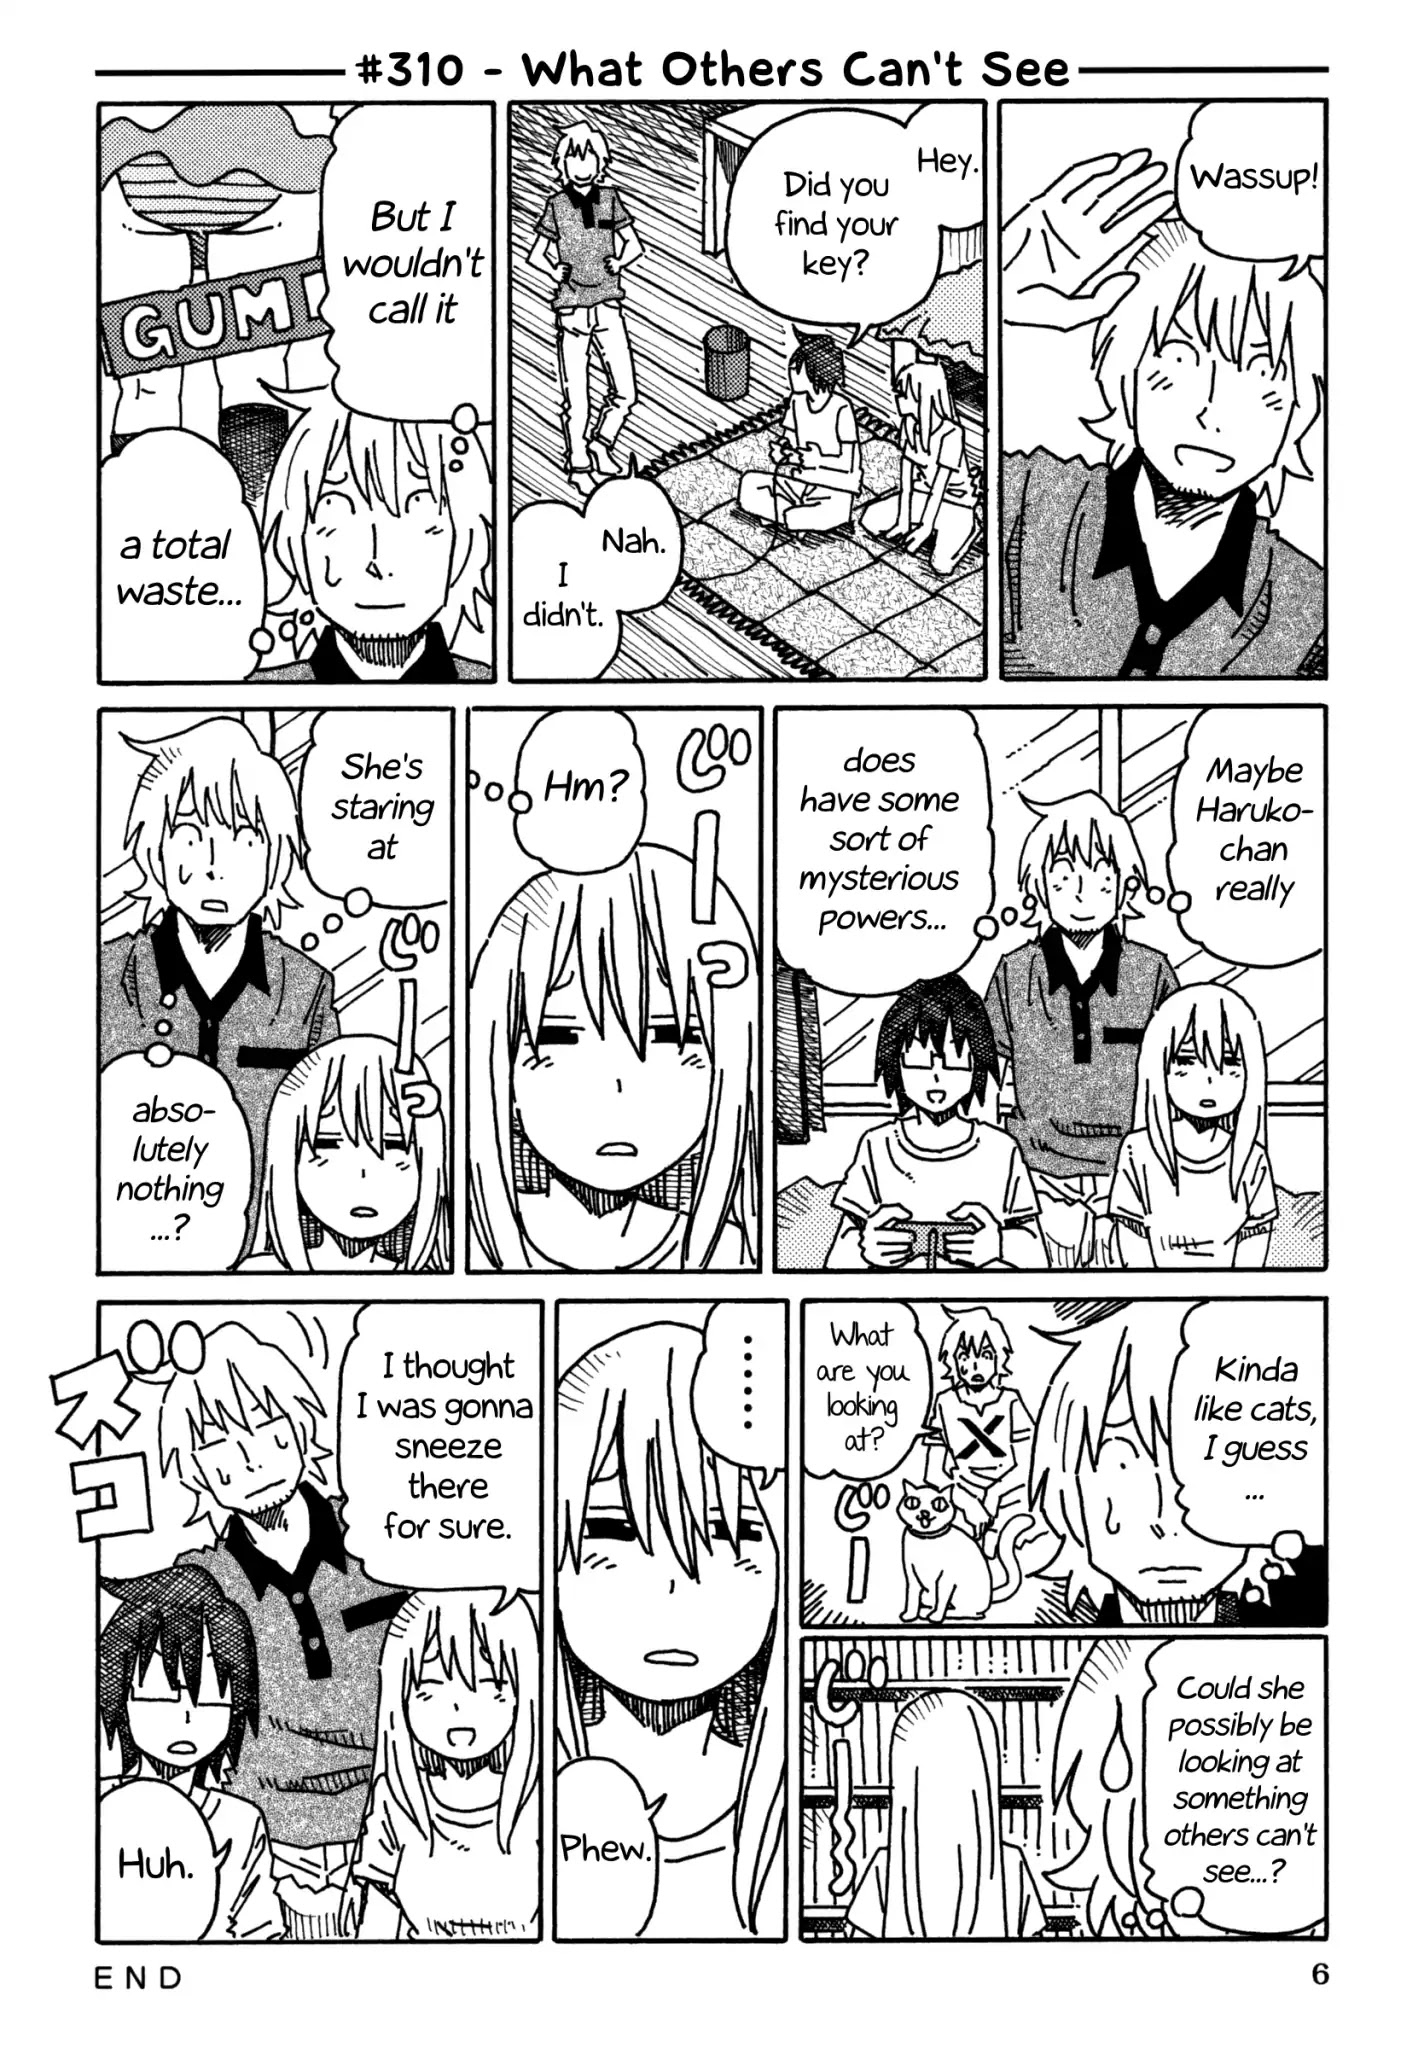 Hatarakanai Futari (The Jobless Siblings) Chapter 310: What Others Can't See